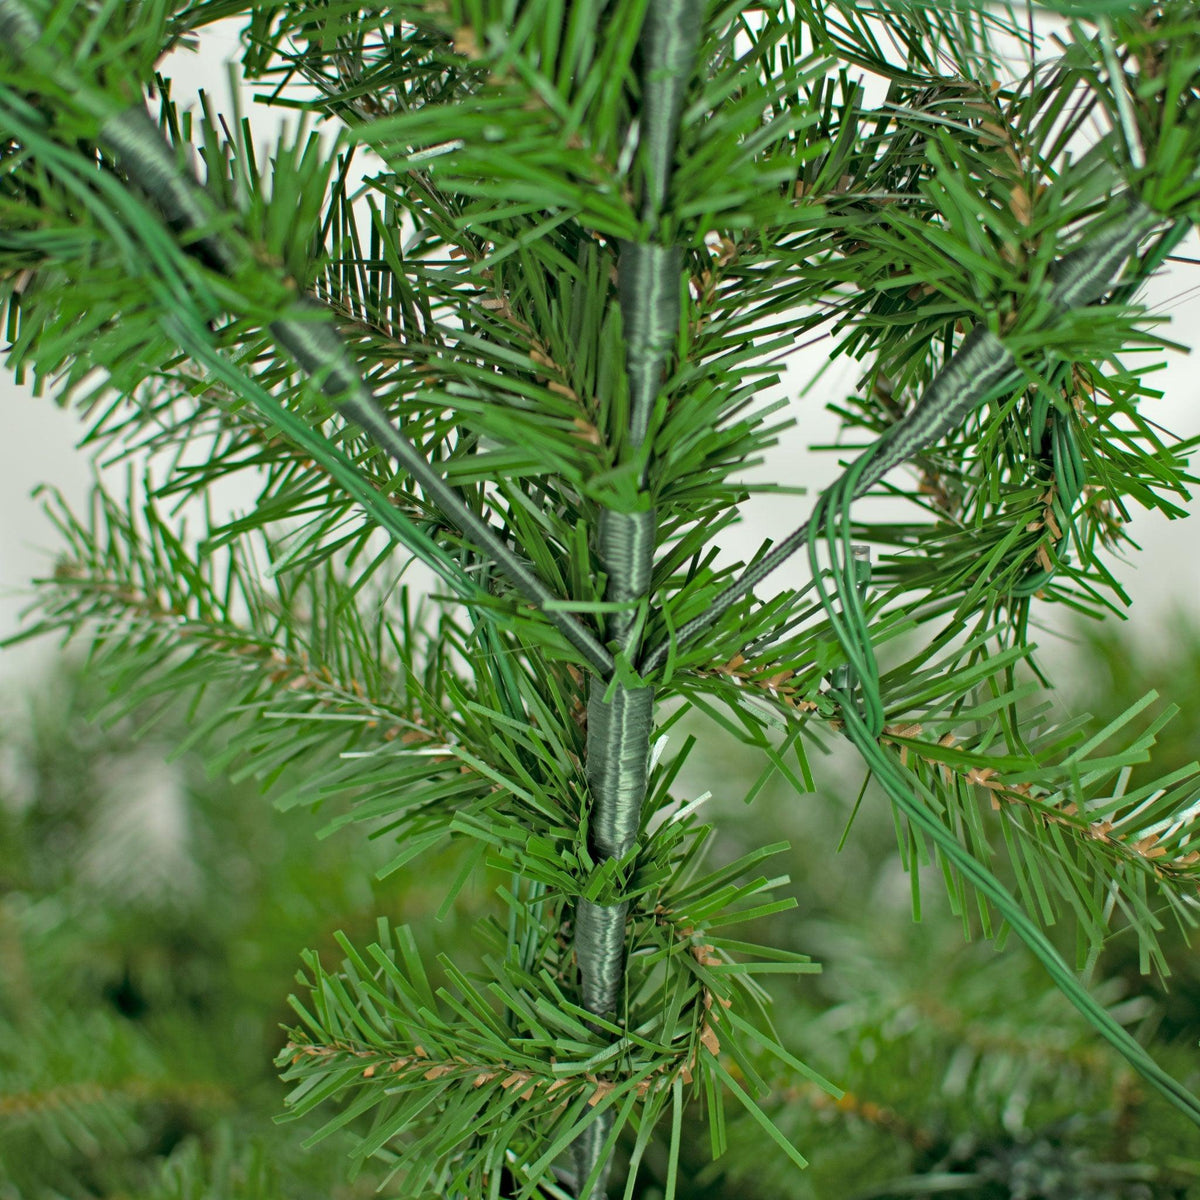 Closeup of the triple spray branch design.  Each branch comes with 3 sprays and multiple tips. 10FT Premier Pine Tree Pre-Lit with LED Lights.  On sale from leedisplay.com